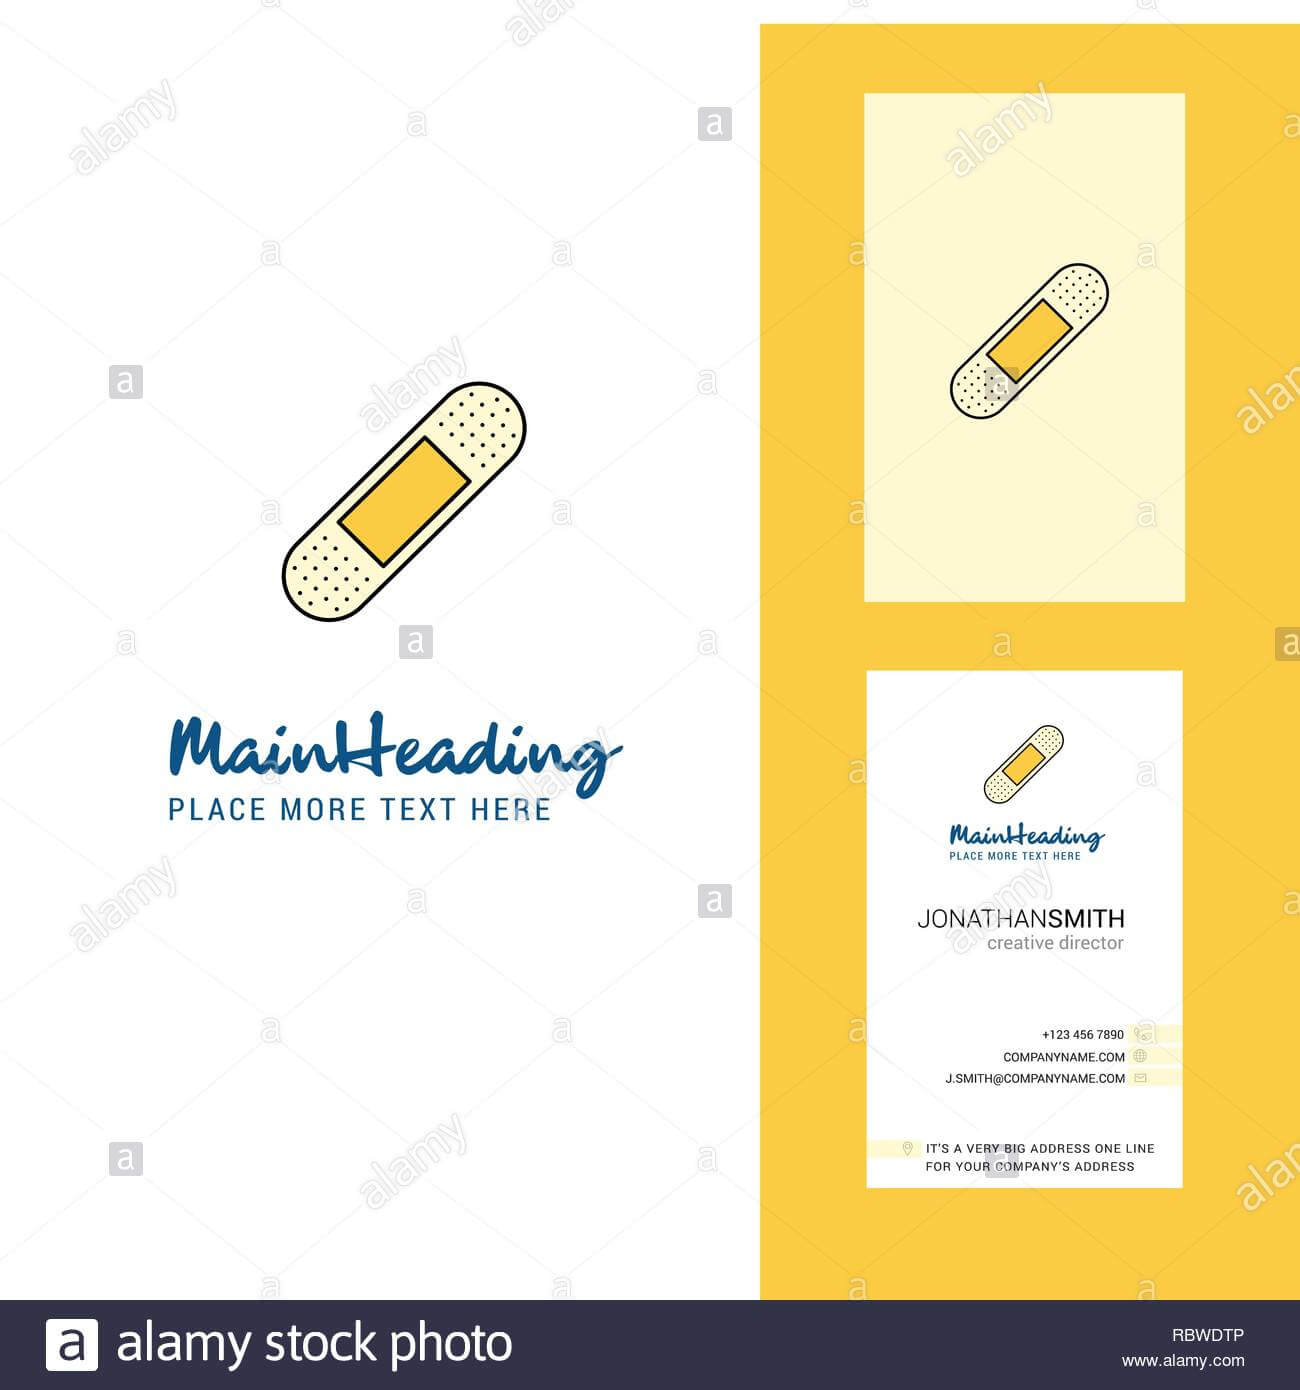 Plaster Creative Logo And Business Card. Vertical Design Pertaining To Plastering Business Cards Templates